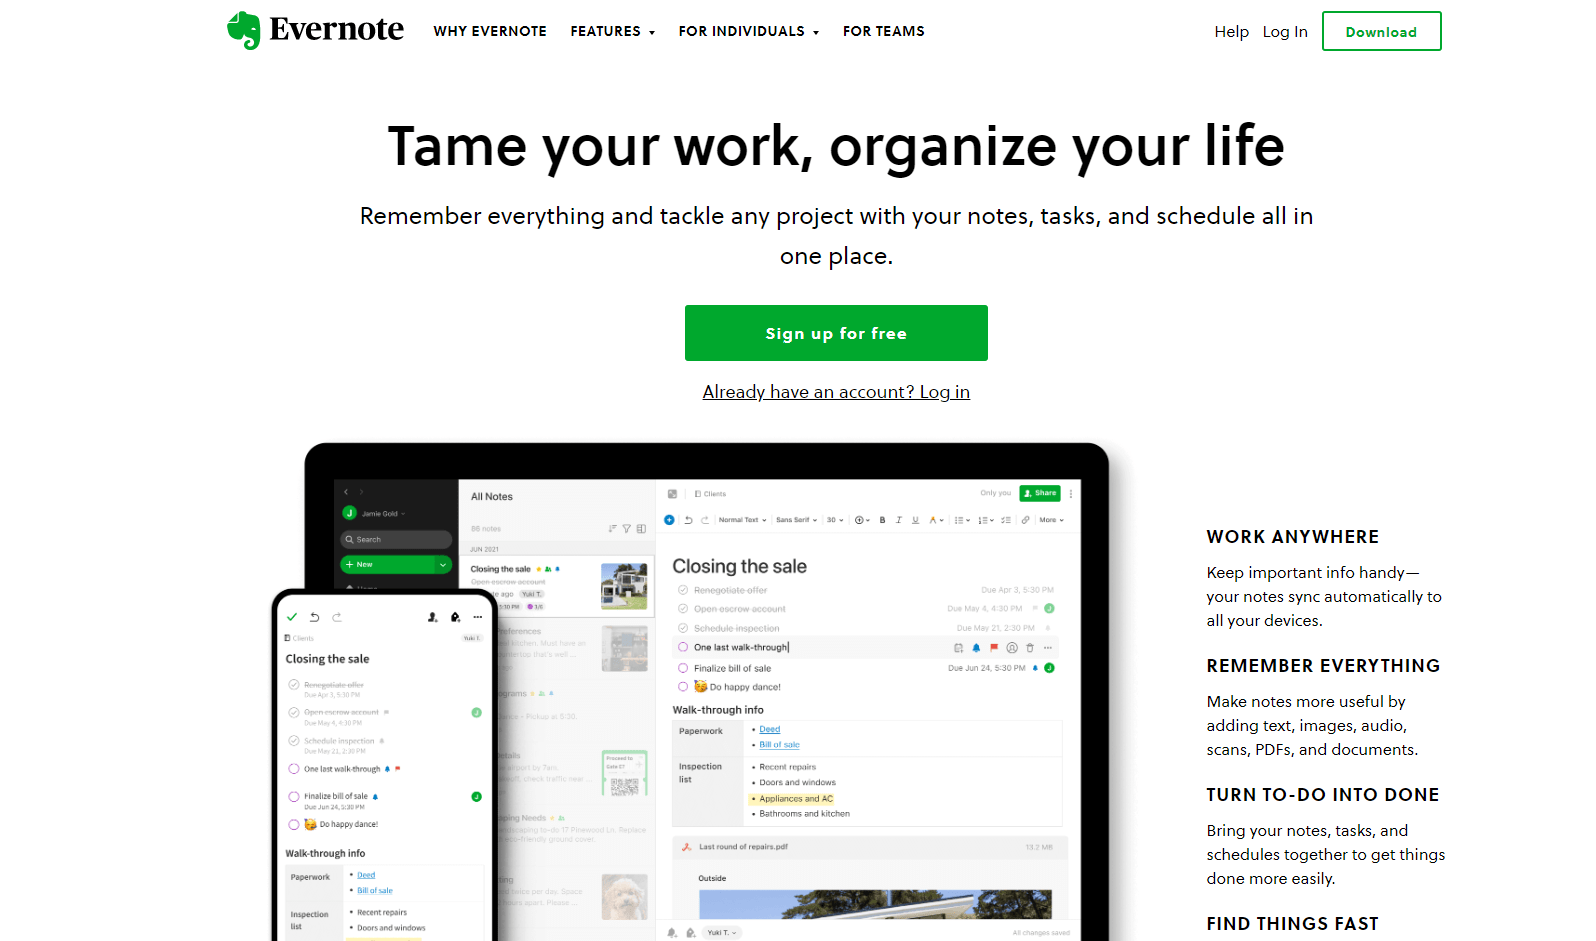 Homepage of Evernote, with title tame your work, organize your life, along with the desktop and mobile app